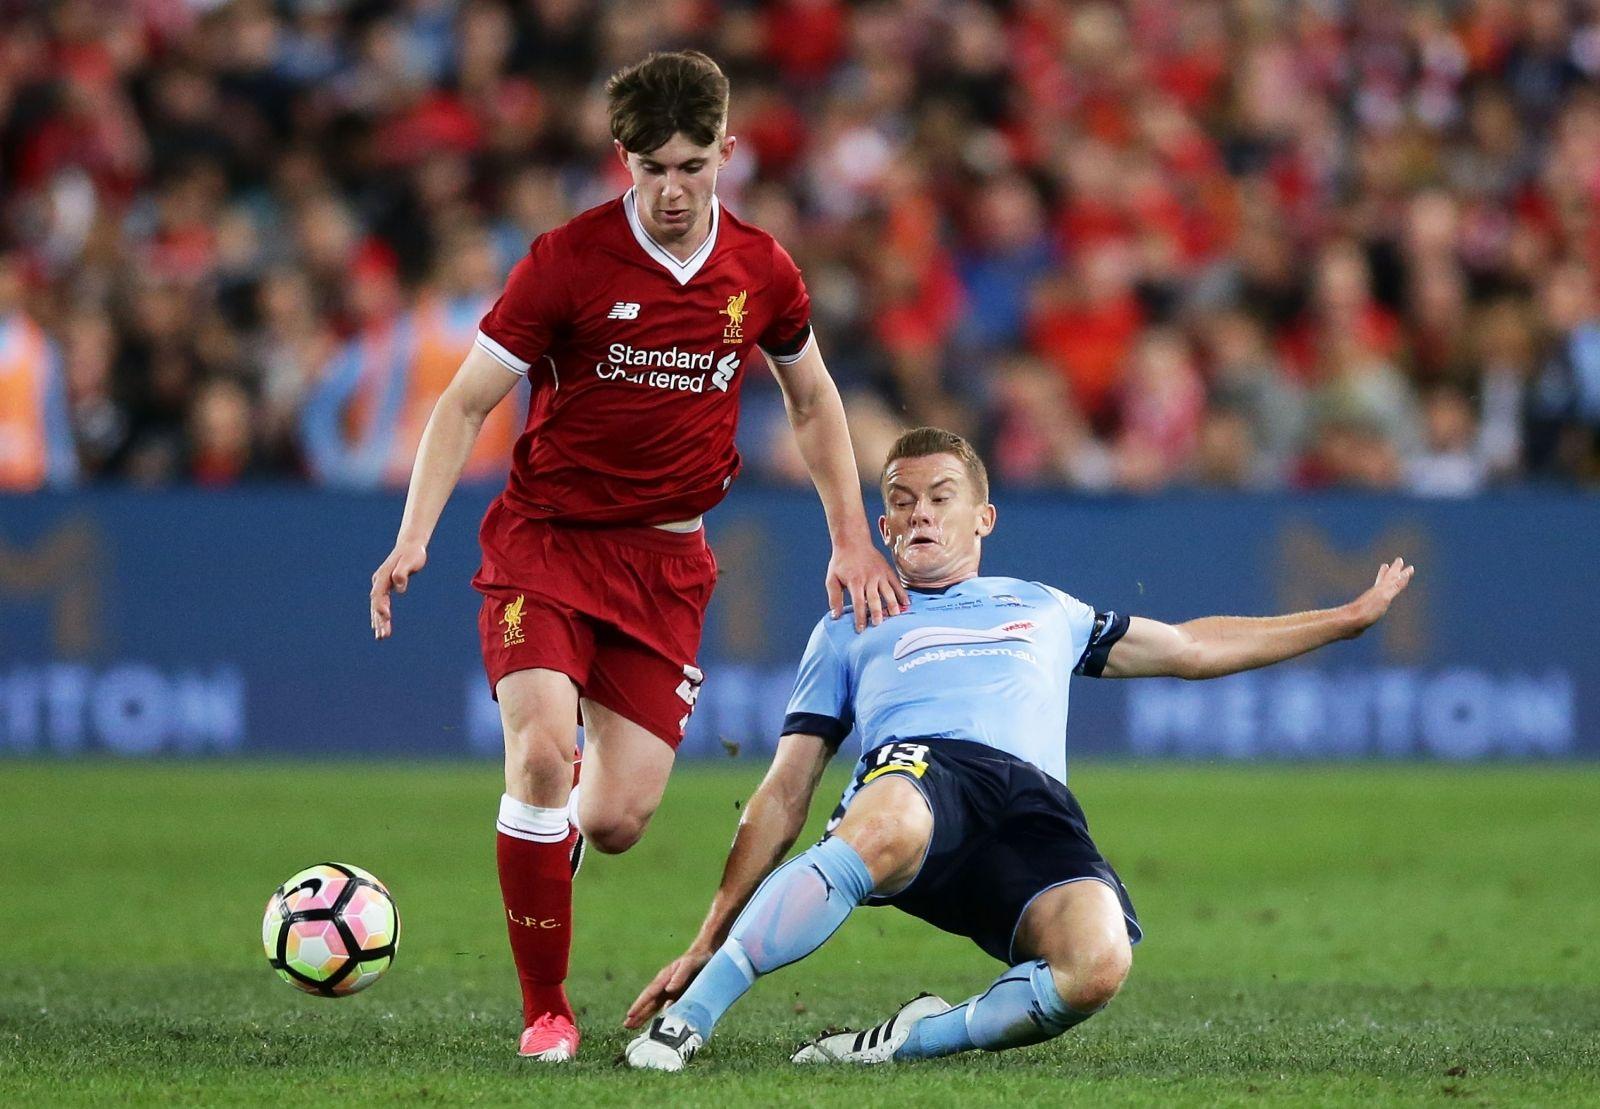 Injured Liverpool forward Ben Woodburn withdraws from Wales squad